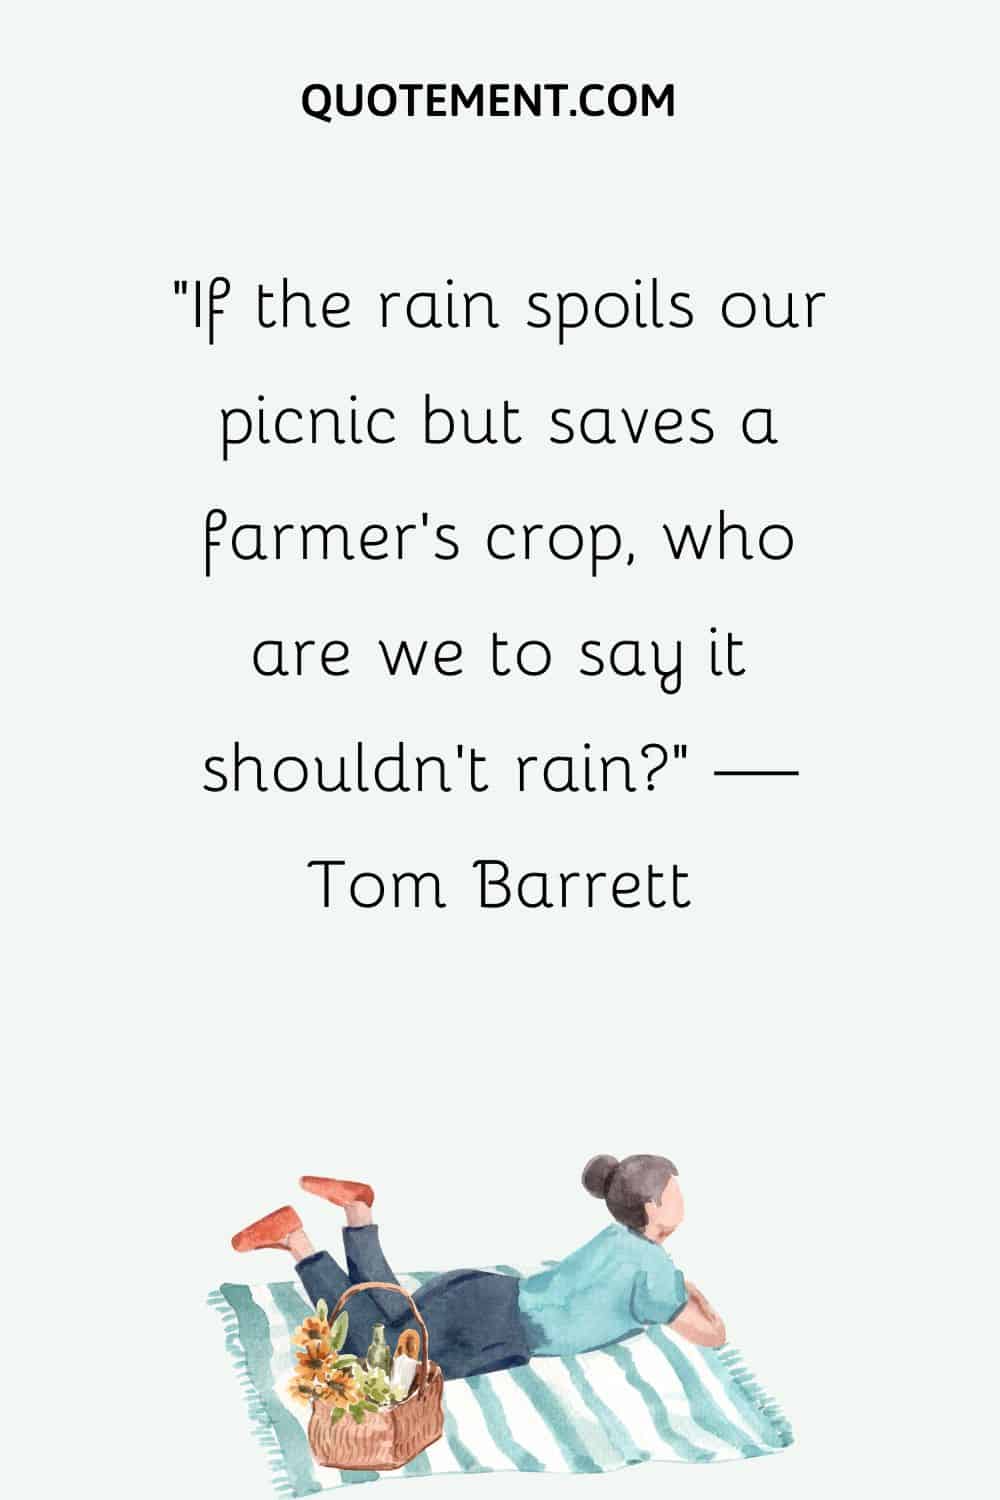 If the rain spoils our picnic but saves a farmer's crop